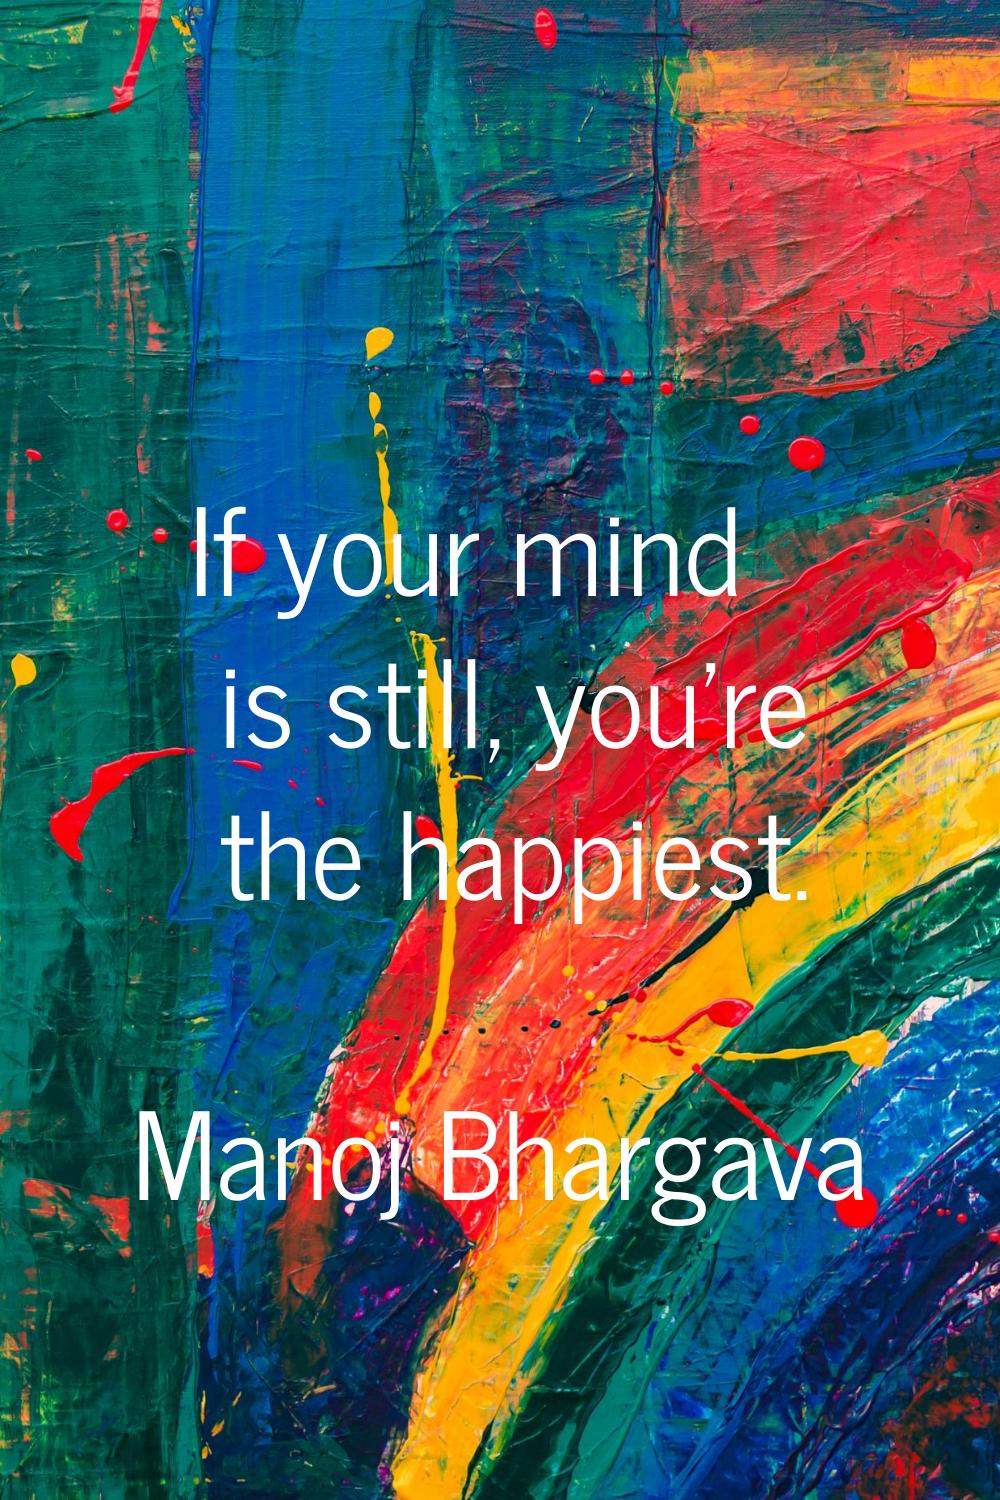 If your mind is still, you're the happiest.